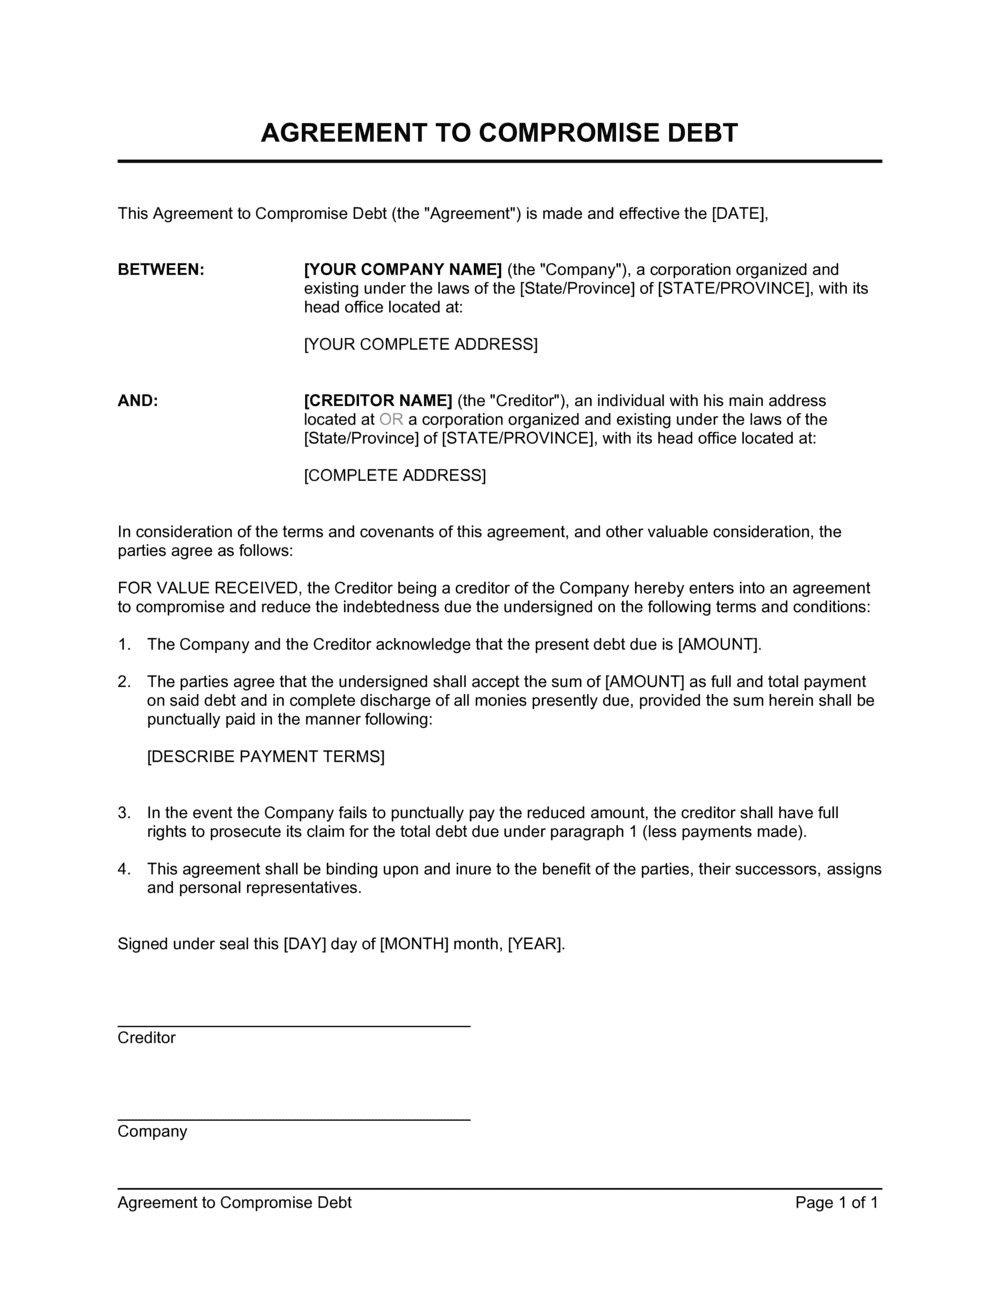 Agreement to Compromise Debt Template  by Business-in-a-Box™ For free debt settlement agreement template